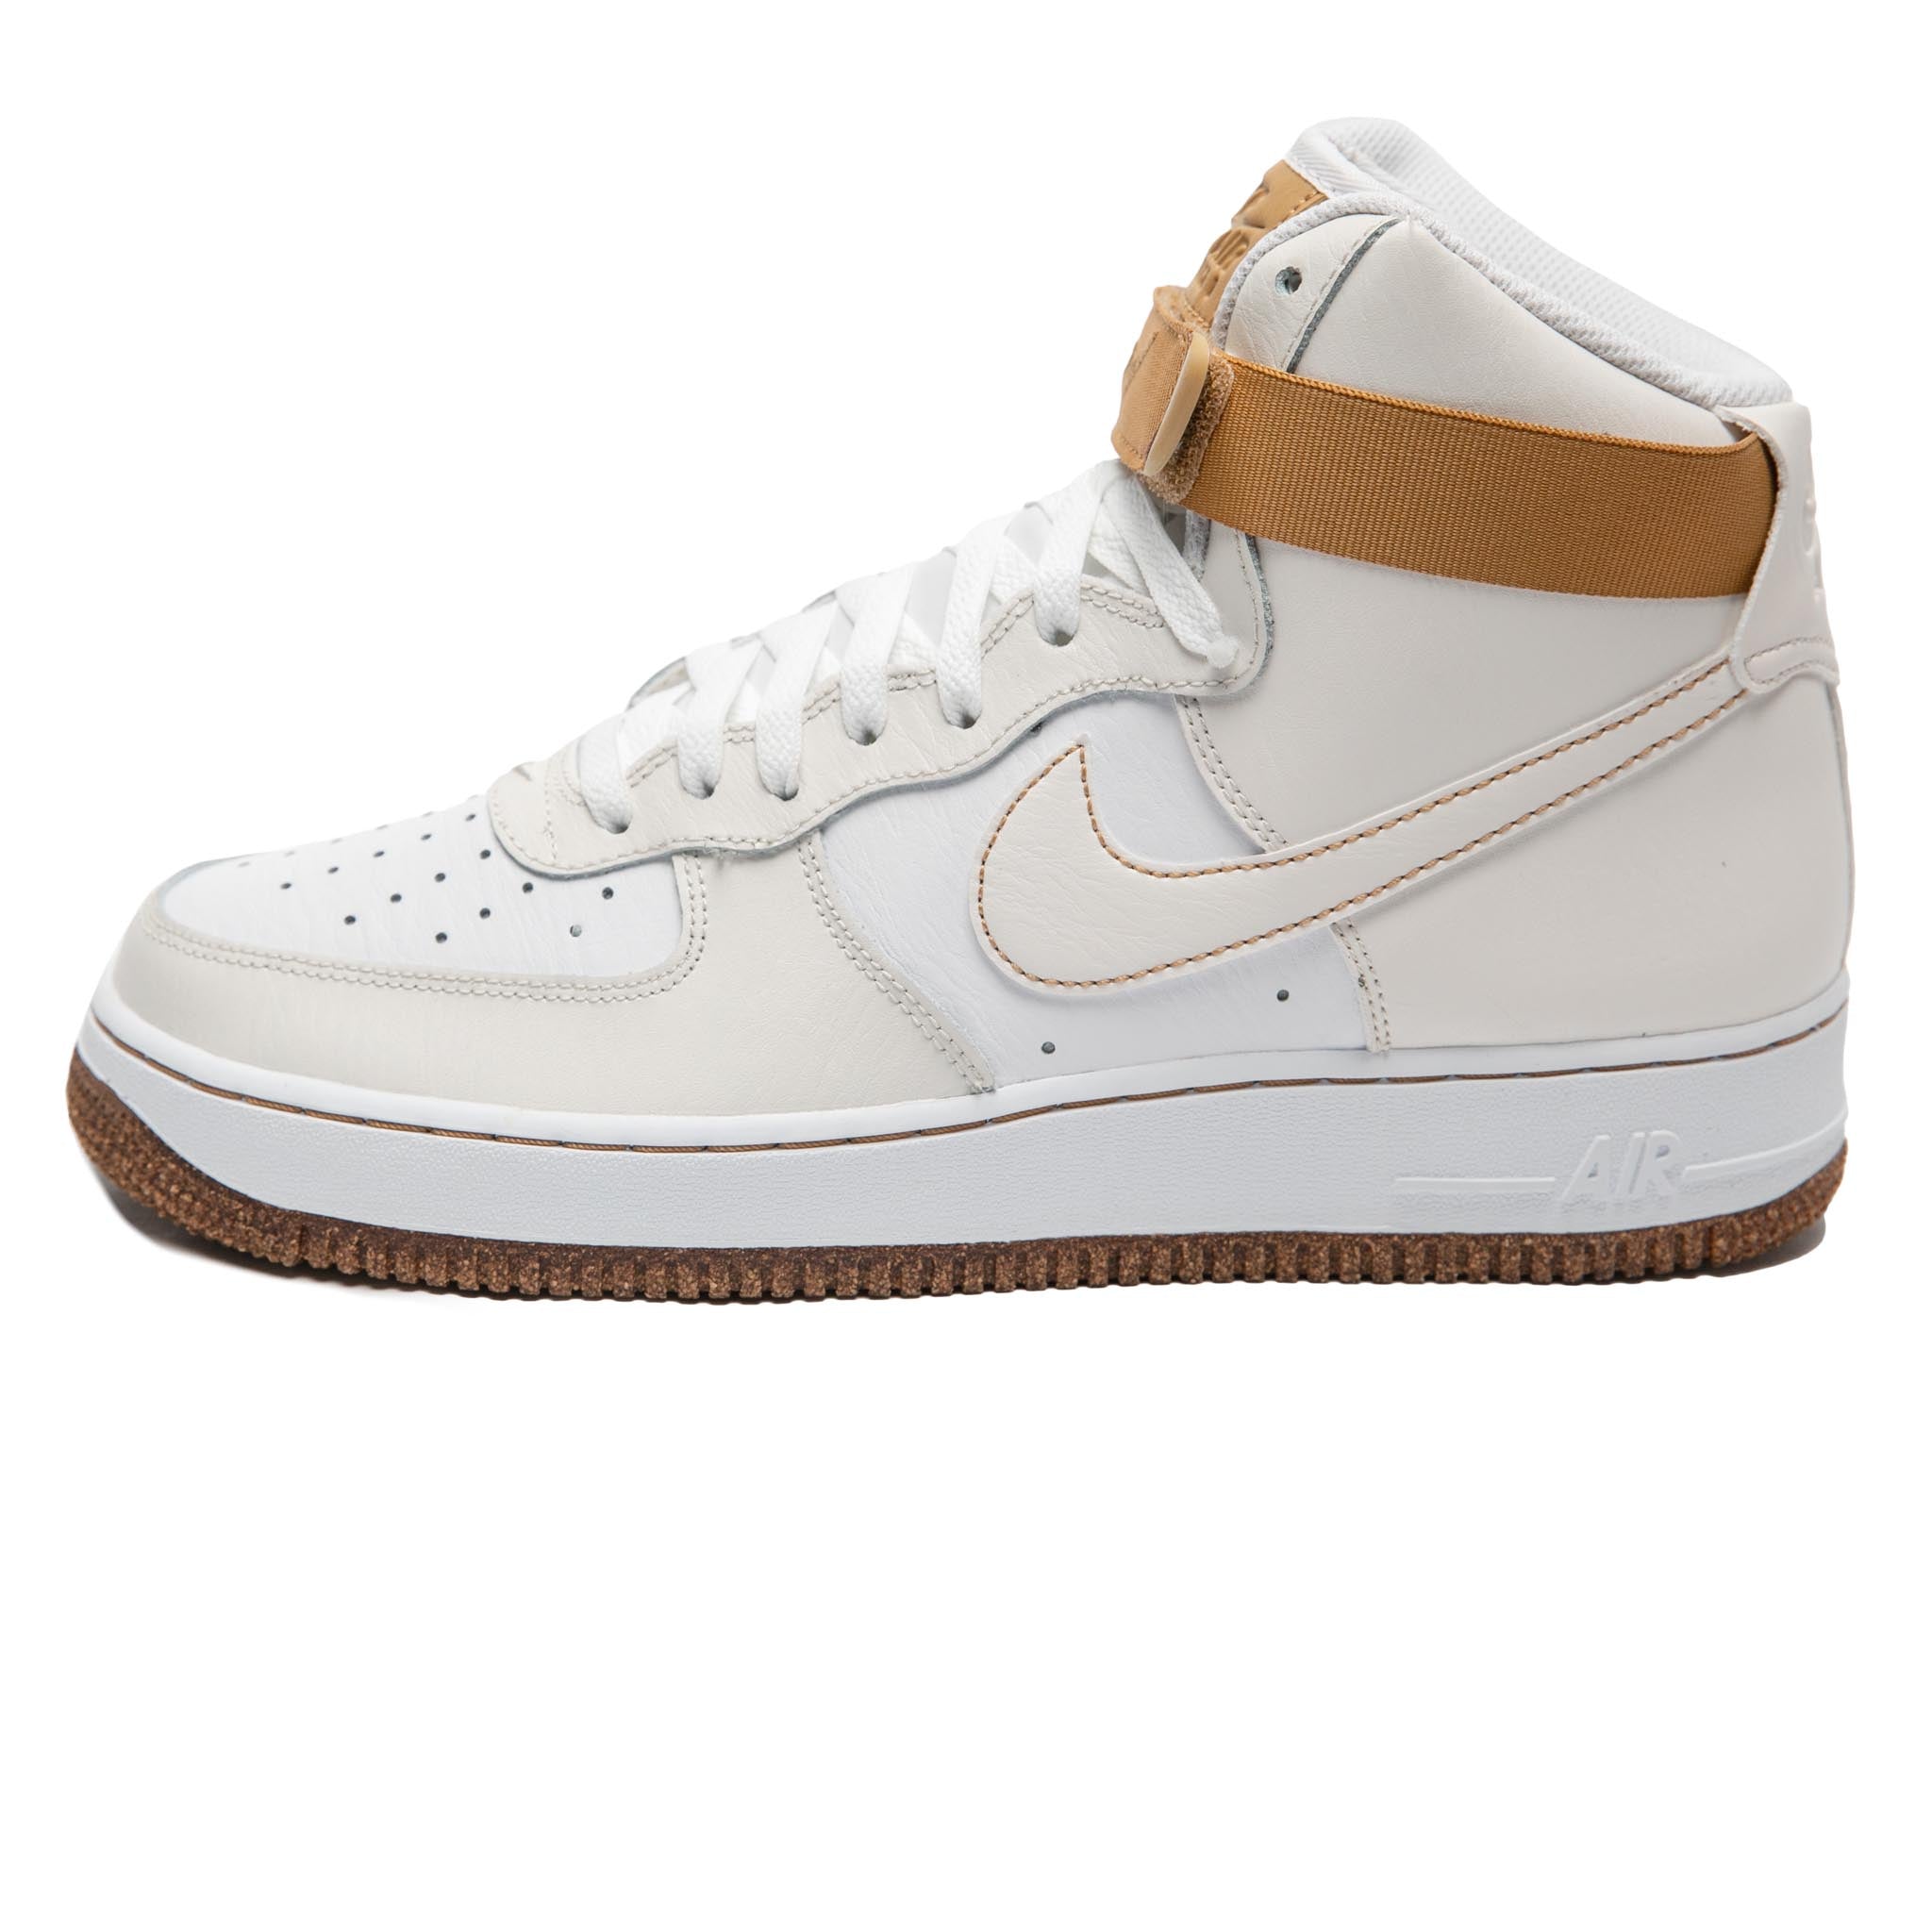 Nike Air Force 1 High 07 EMB 'Inpsected By Swoosh' | SNEAKERBOX